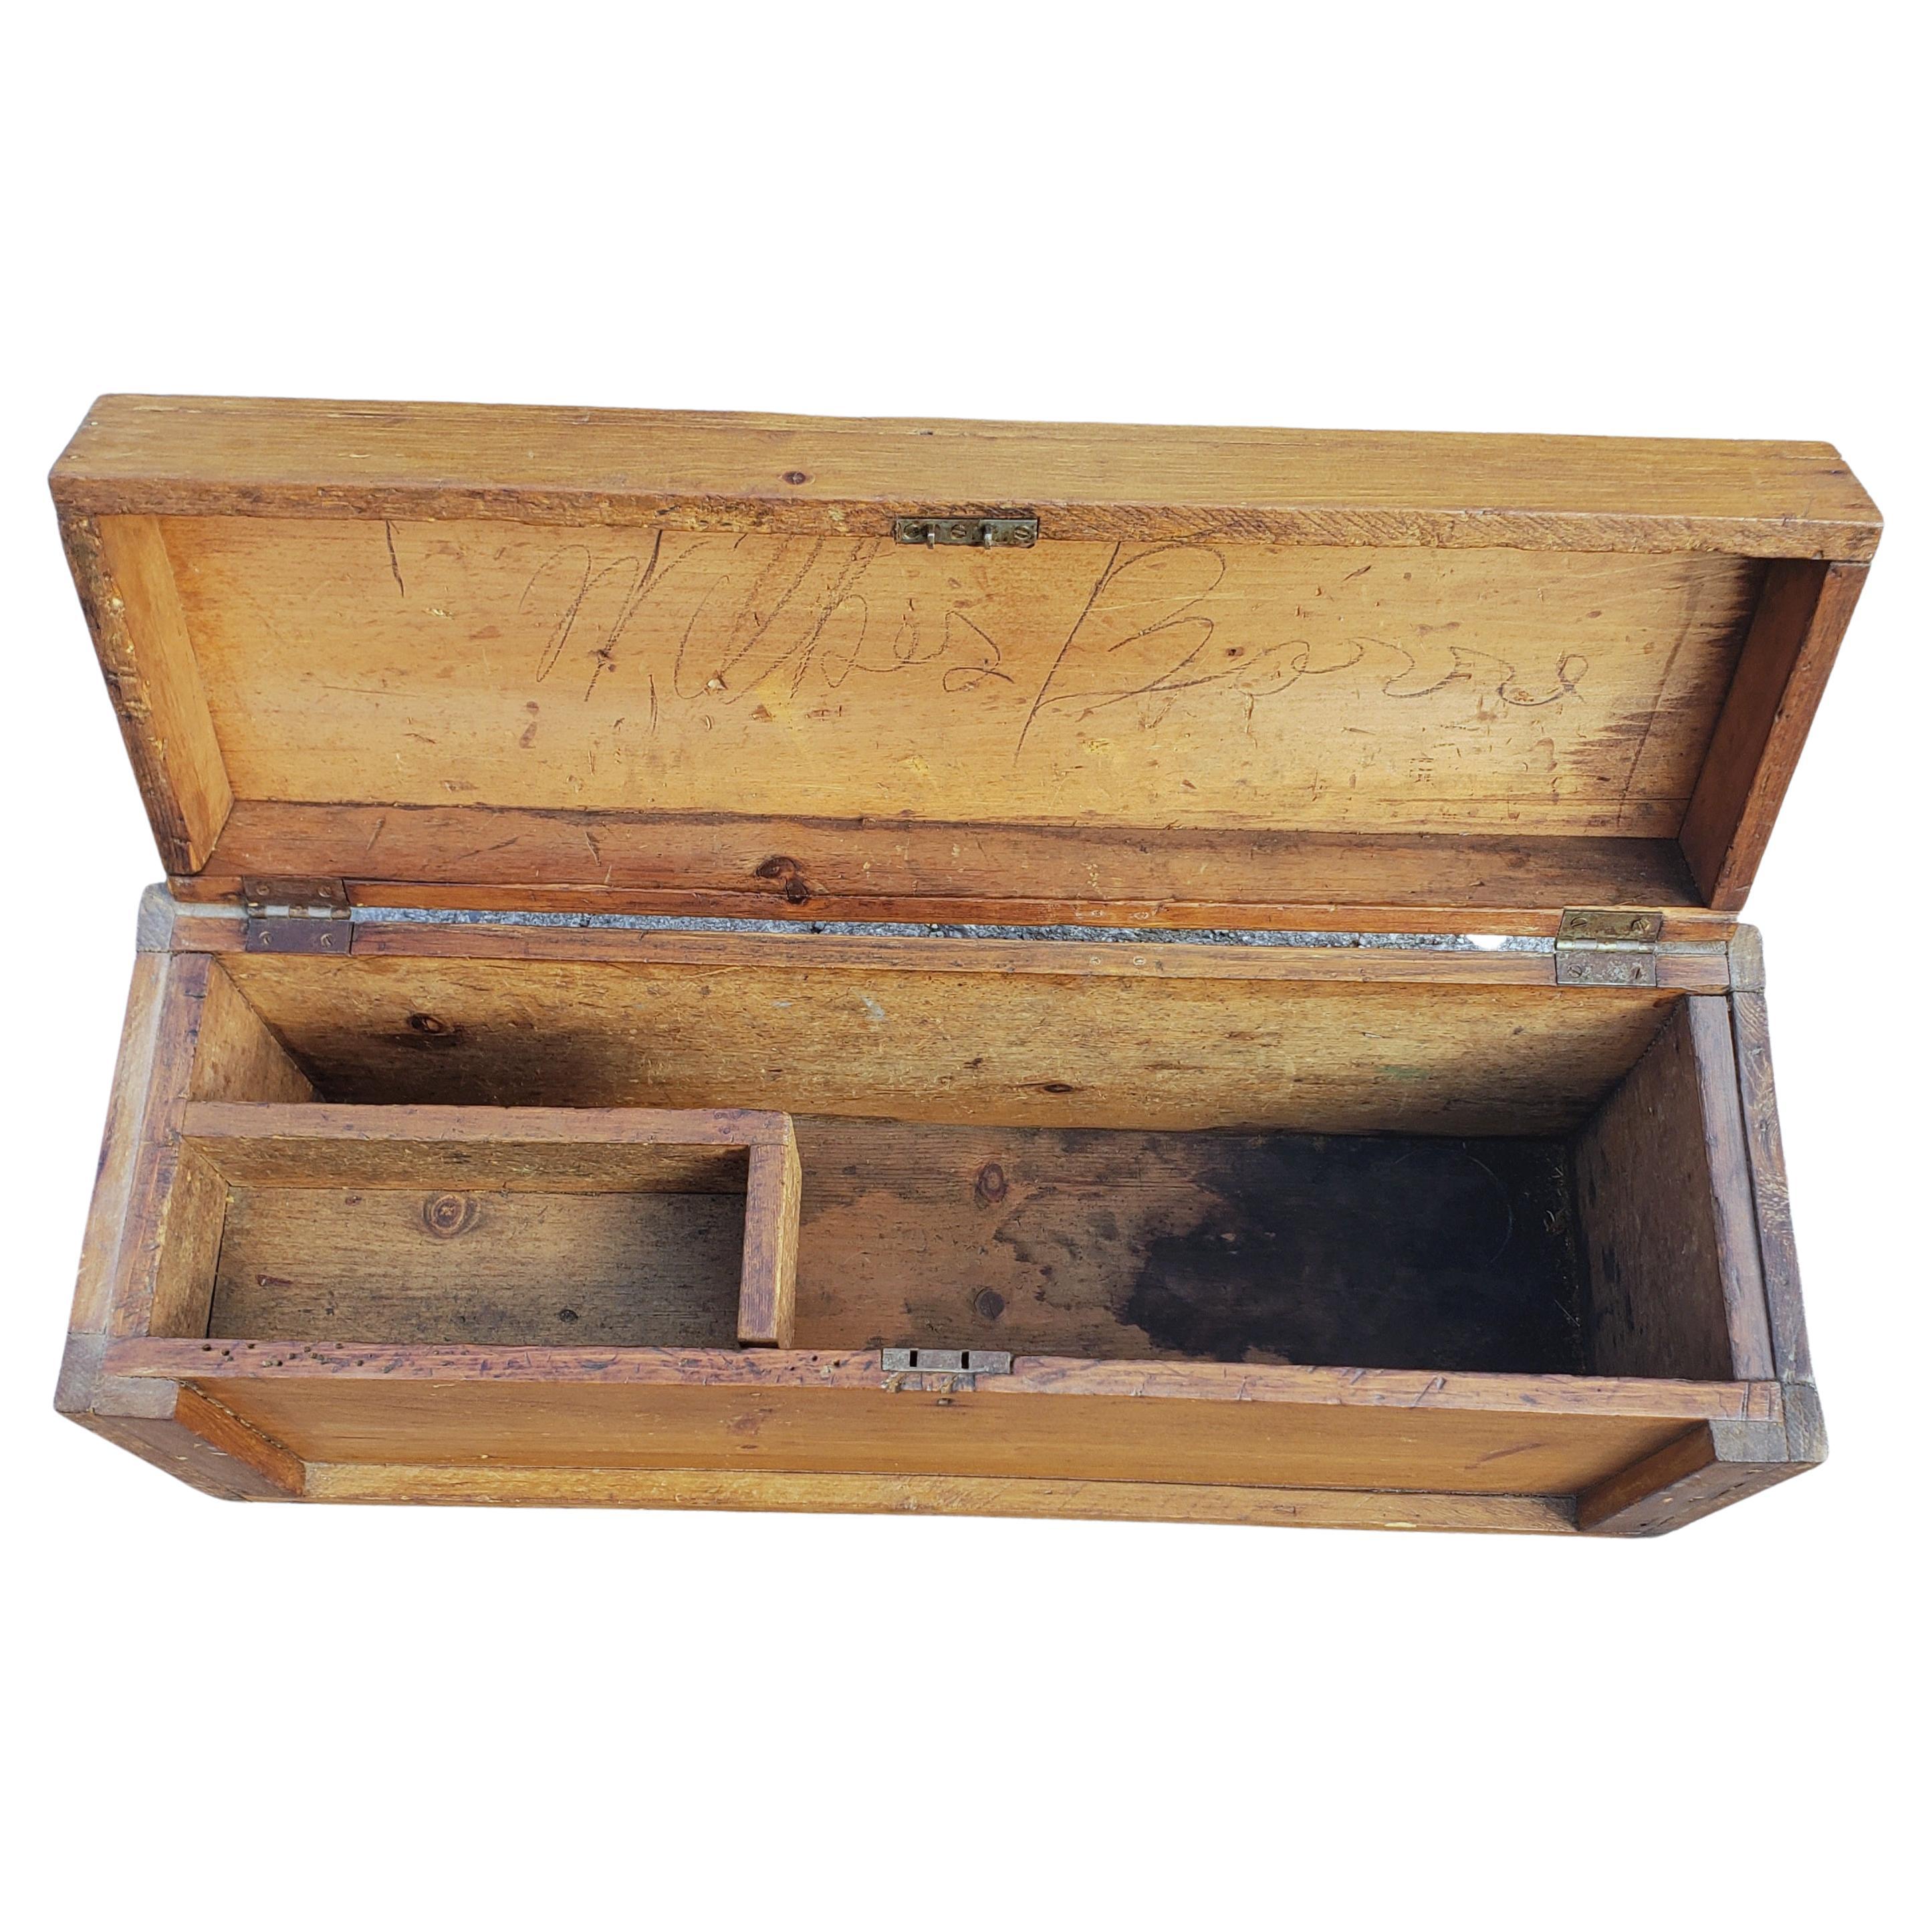 Early 20th Century American Primitive Wooden Tool Box For Sale 1